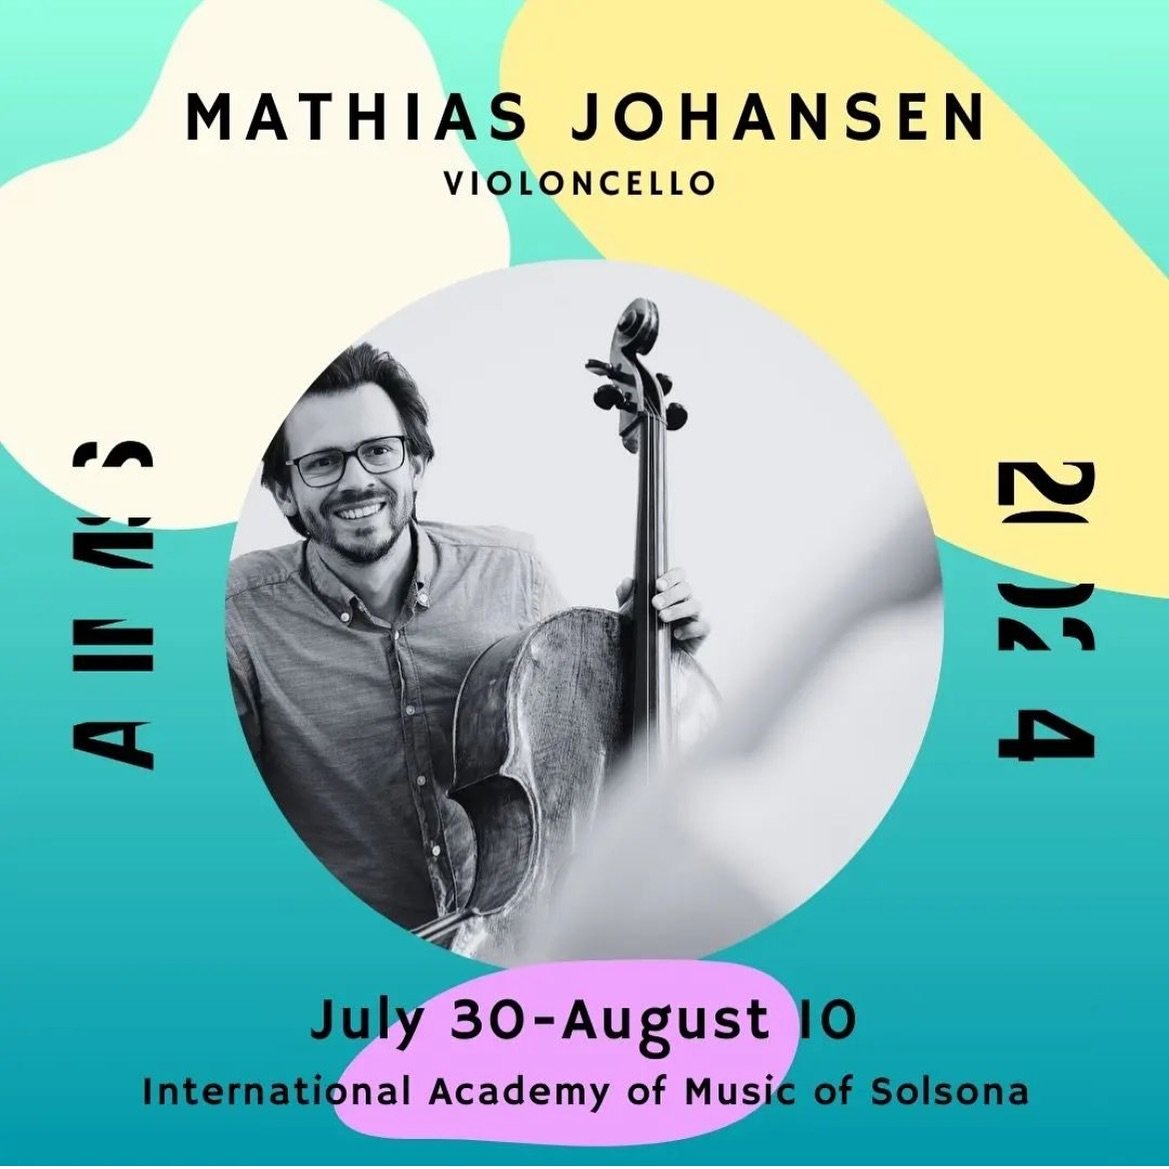 Apply now for this amazing master class!
About 30 concerts for the students. Ideal to prepare for competitions and for life ;)
Spain in summer ❤️ @aimsfestival 
.
.
.
.
.
.
.
#cello #cellos #cellist #music #classical #classicalmusic #musician #chambe